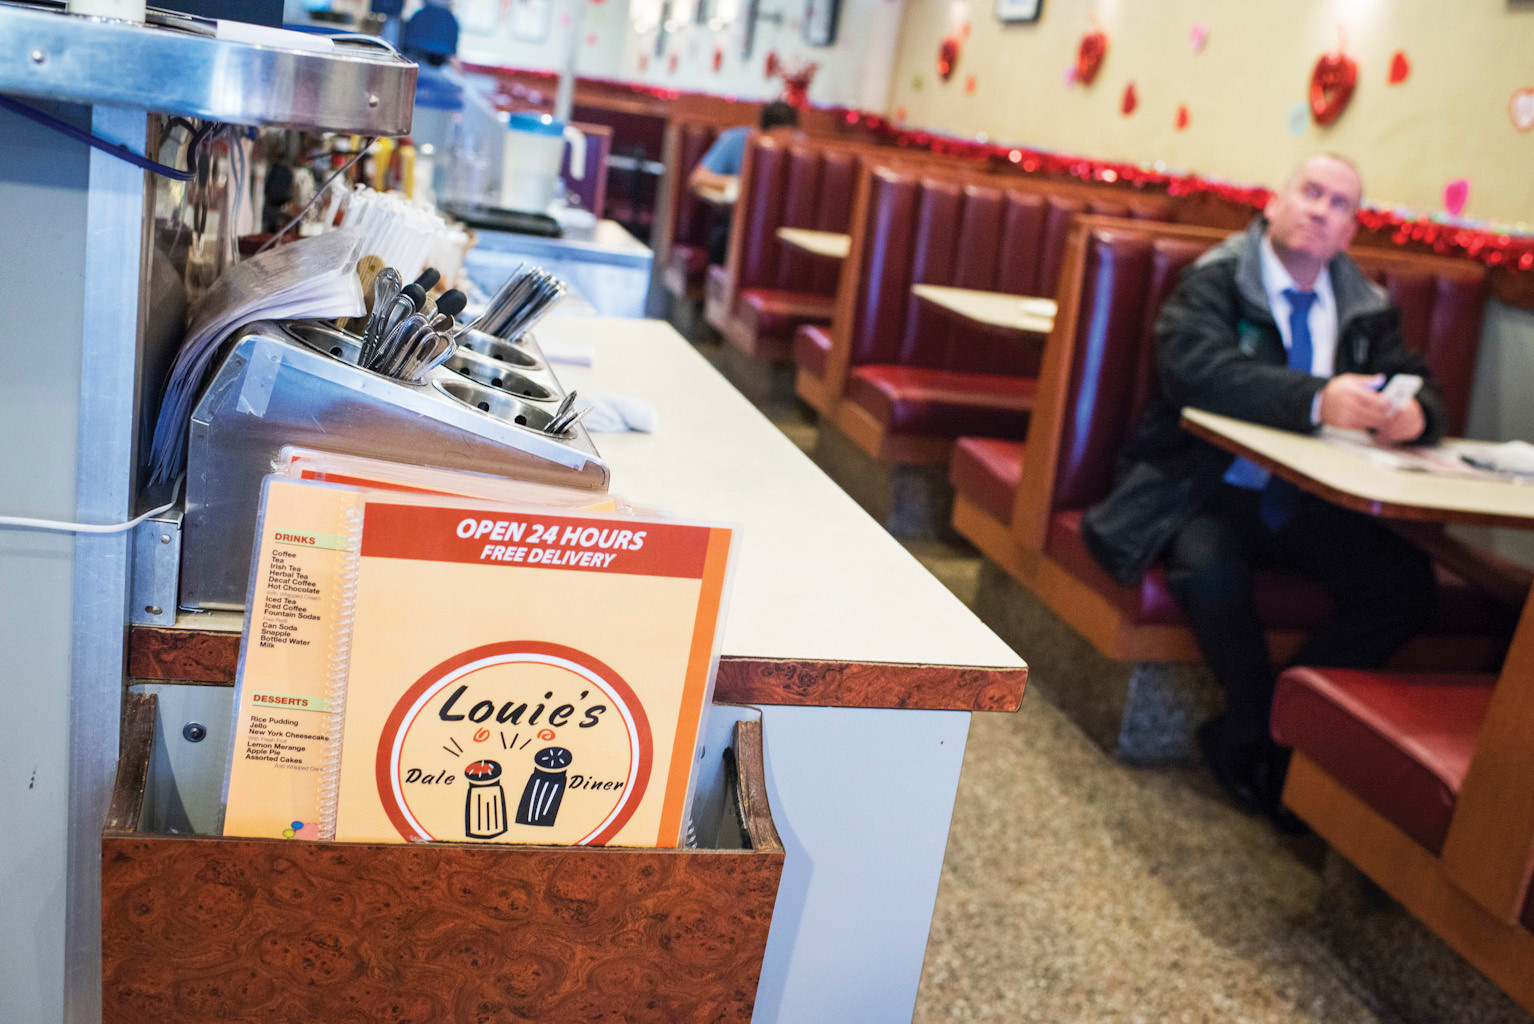 The Louie's Dale Diner interior.